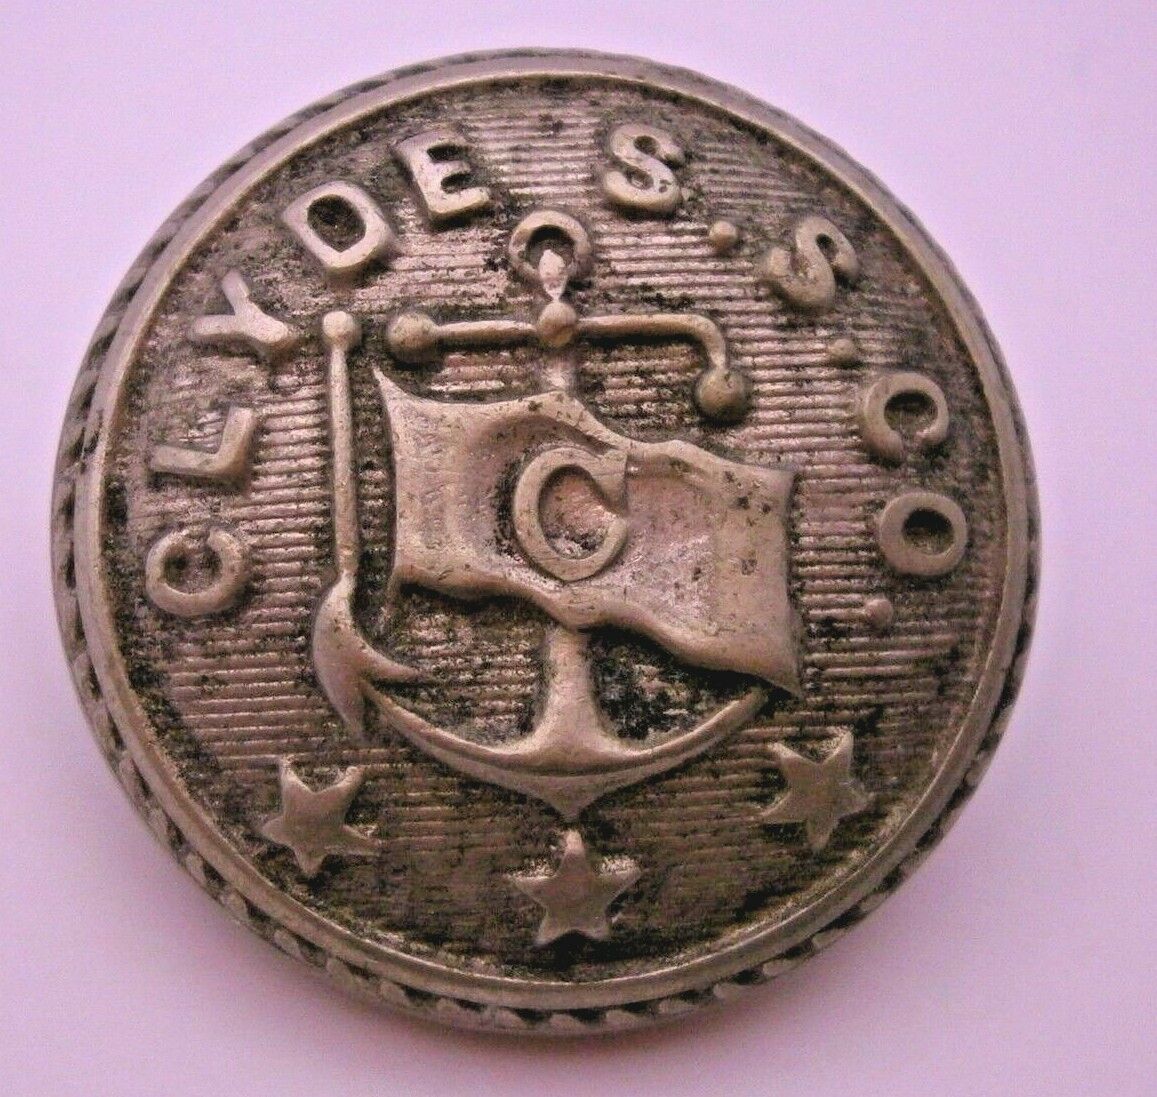 Clyde Steamship Co. Uniform Button from the Early 1900\'s by the Scovill MFG Co